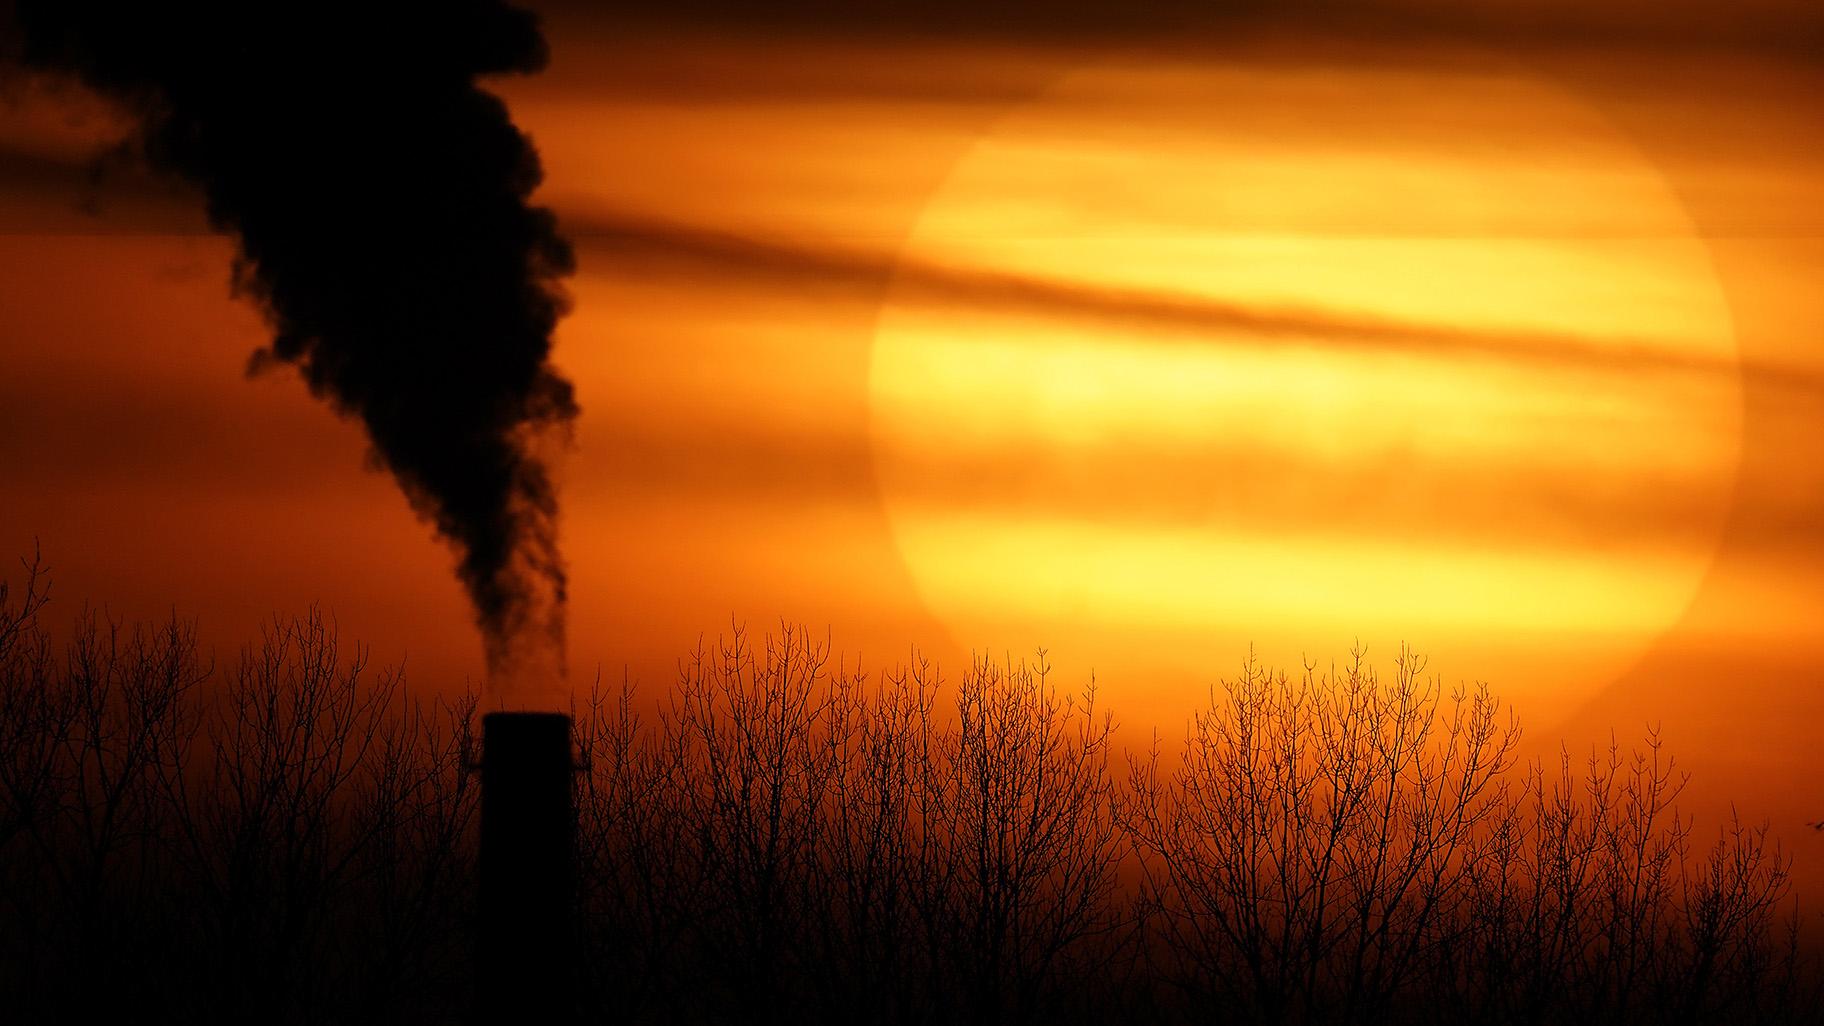  Emissions from a coal-fired power plant are silhouetted against the setting sun in Kansas City, Mo., Feb. 1, 2021. (AP Photo / Charlie Riedel, File)